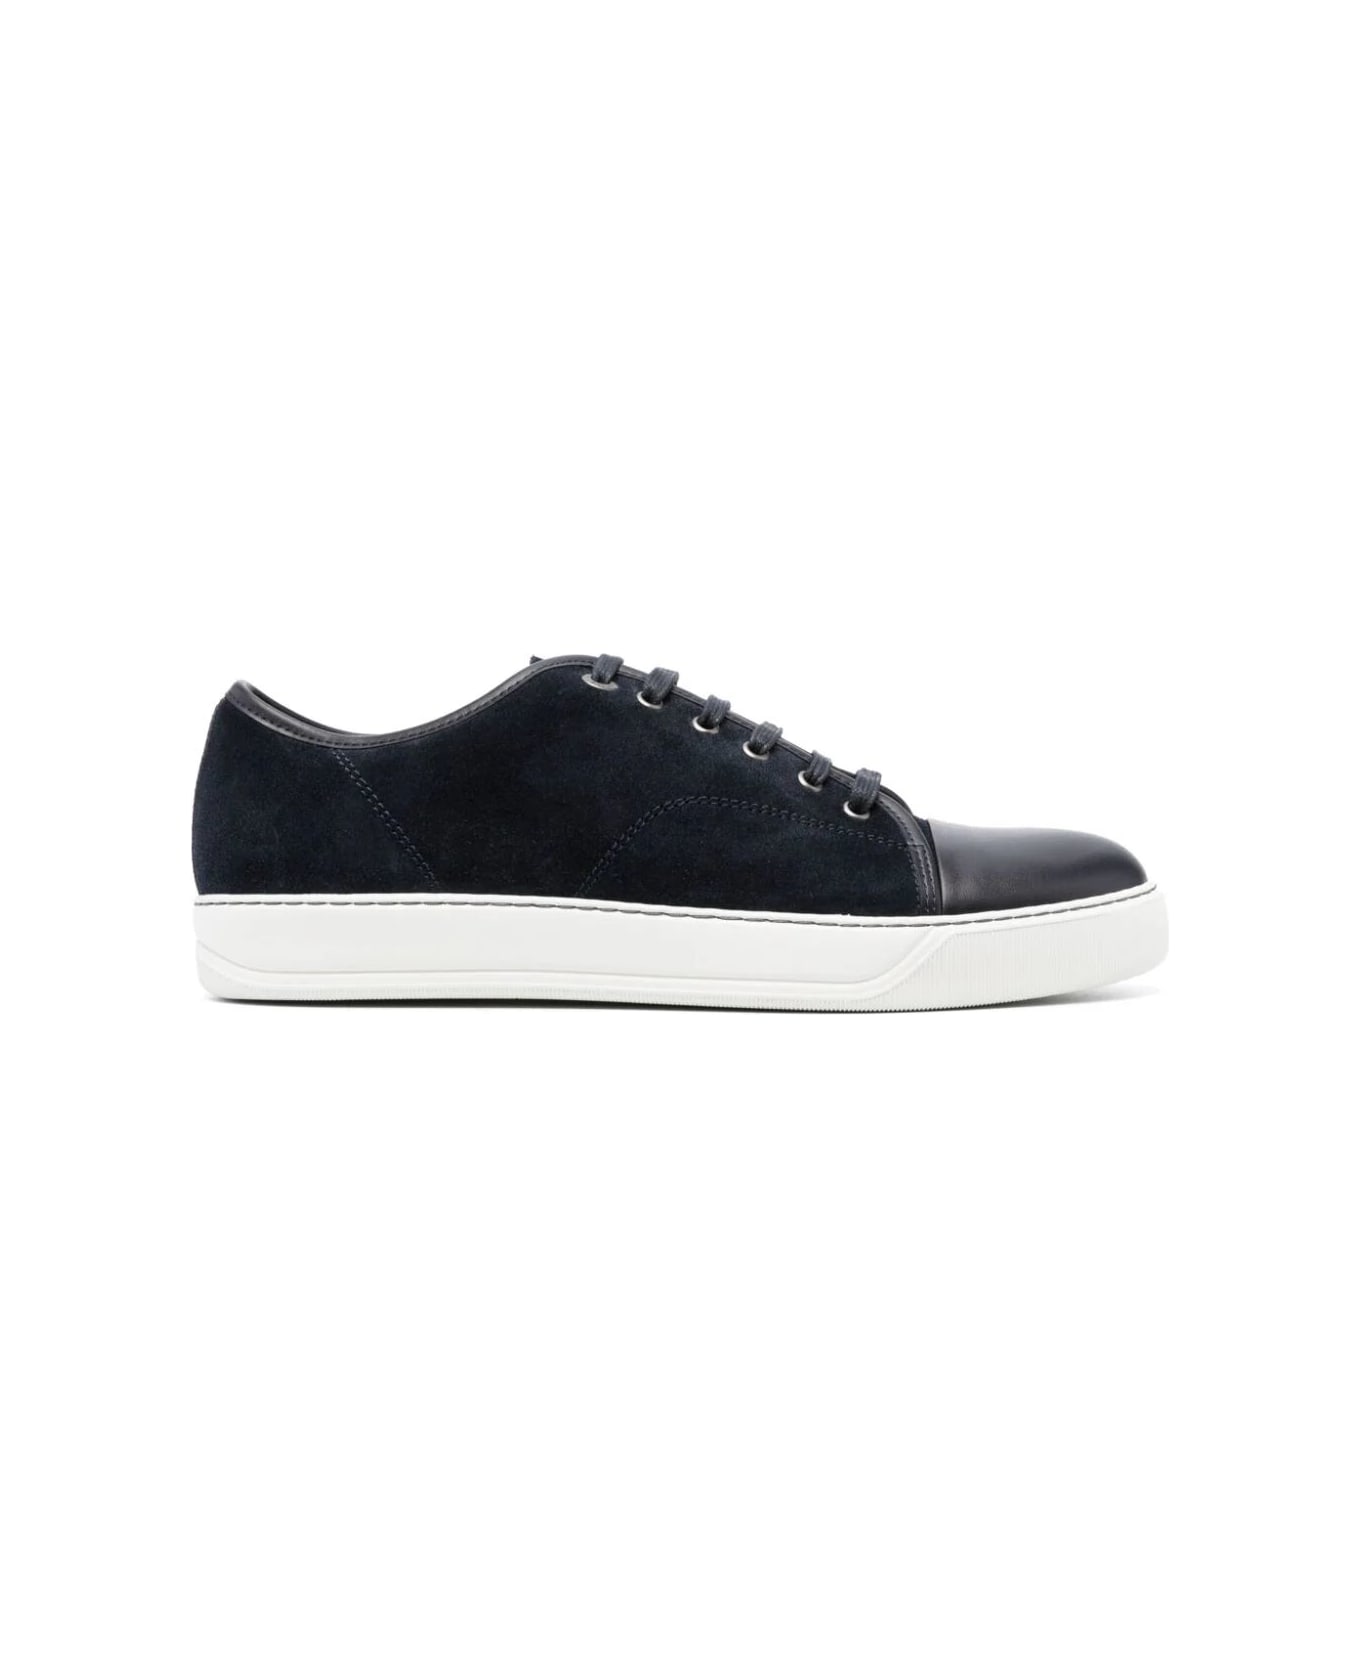 Lanvin Suede And Nappa Captoe Low To Sneaker - Navy Blue